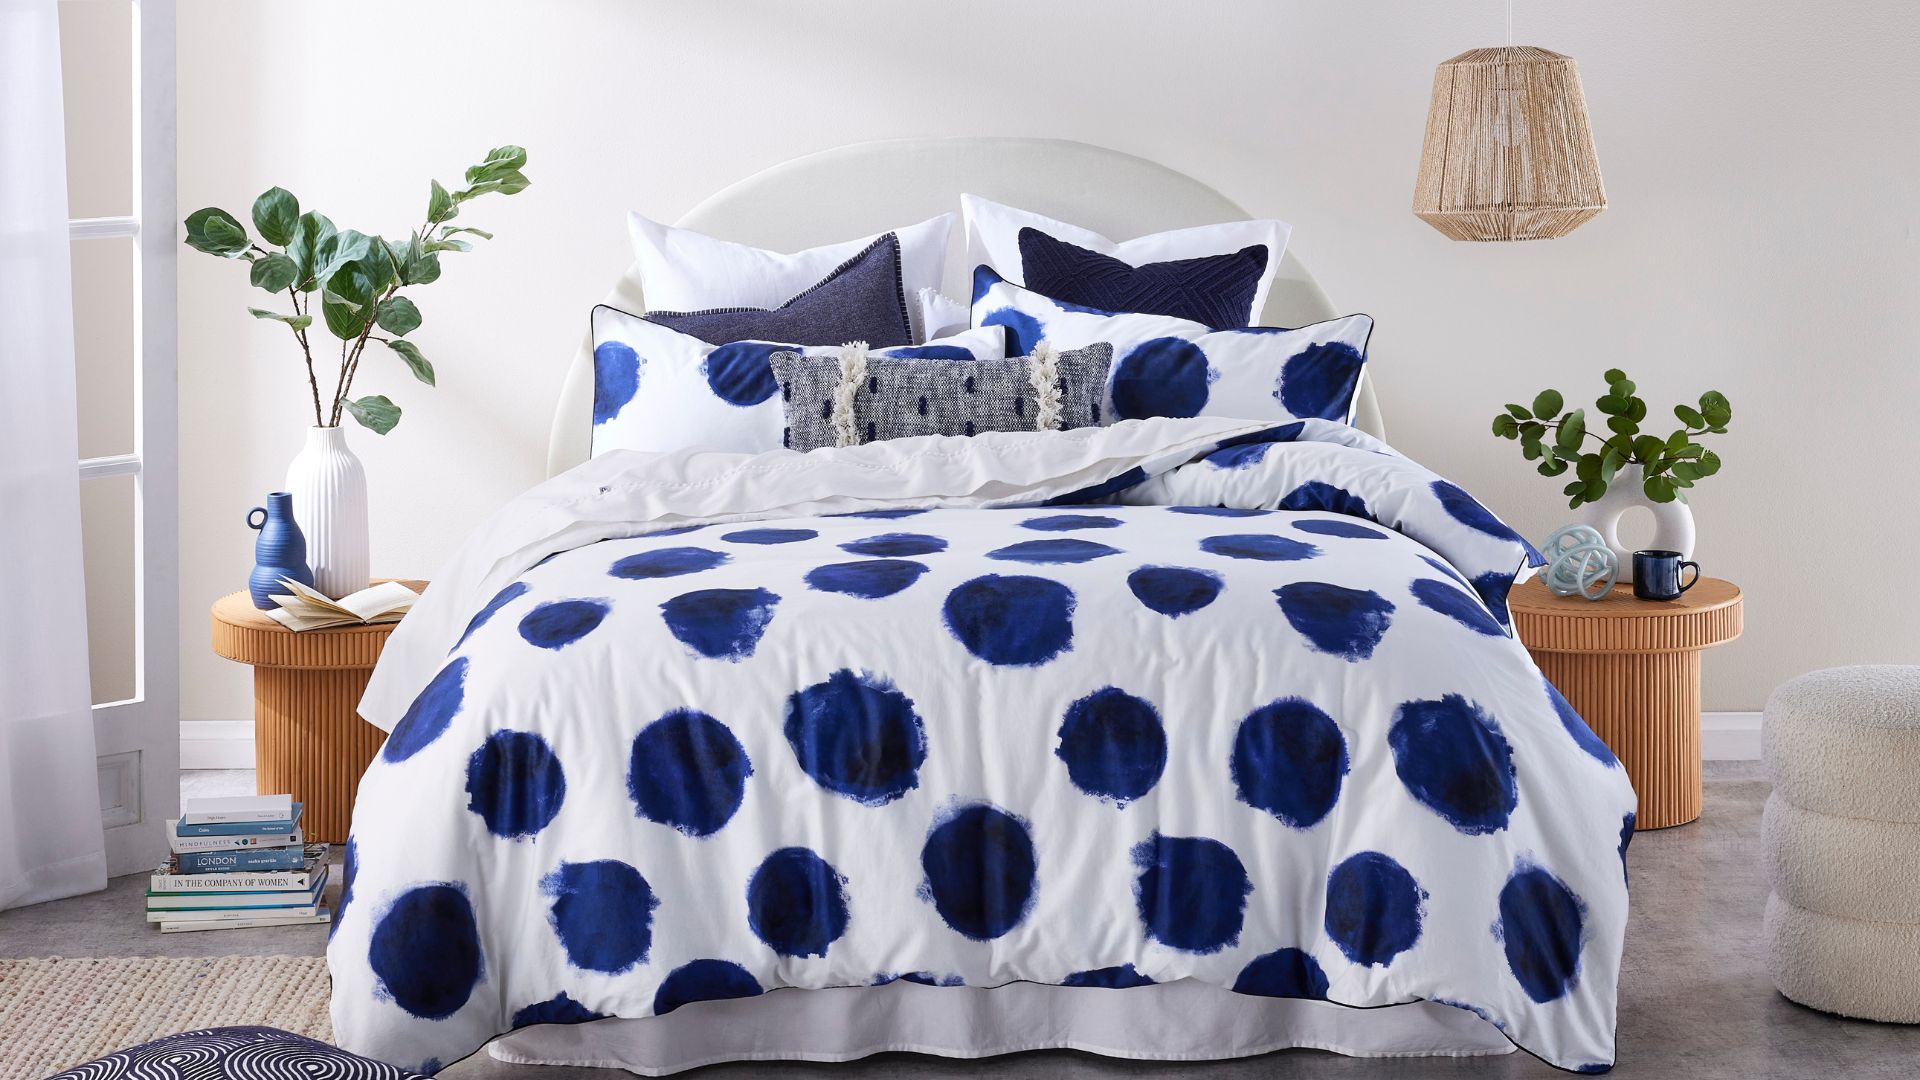 Bed Linen Styling Guide: How to Style a Bed Like a Pro